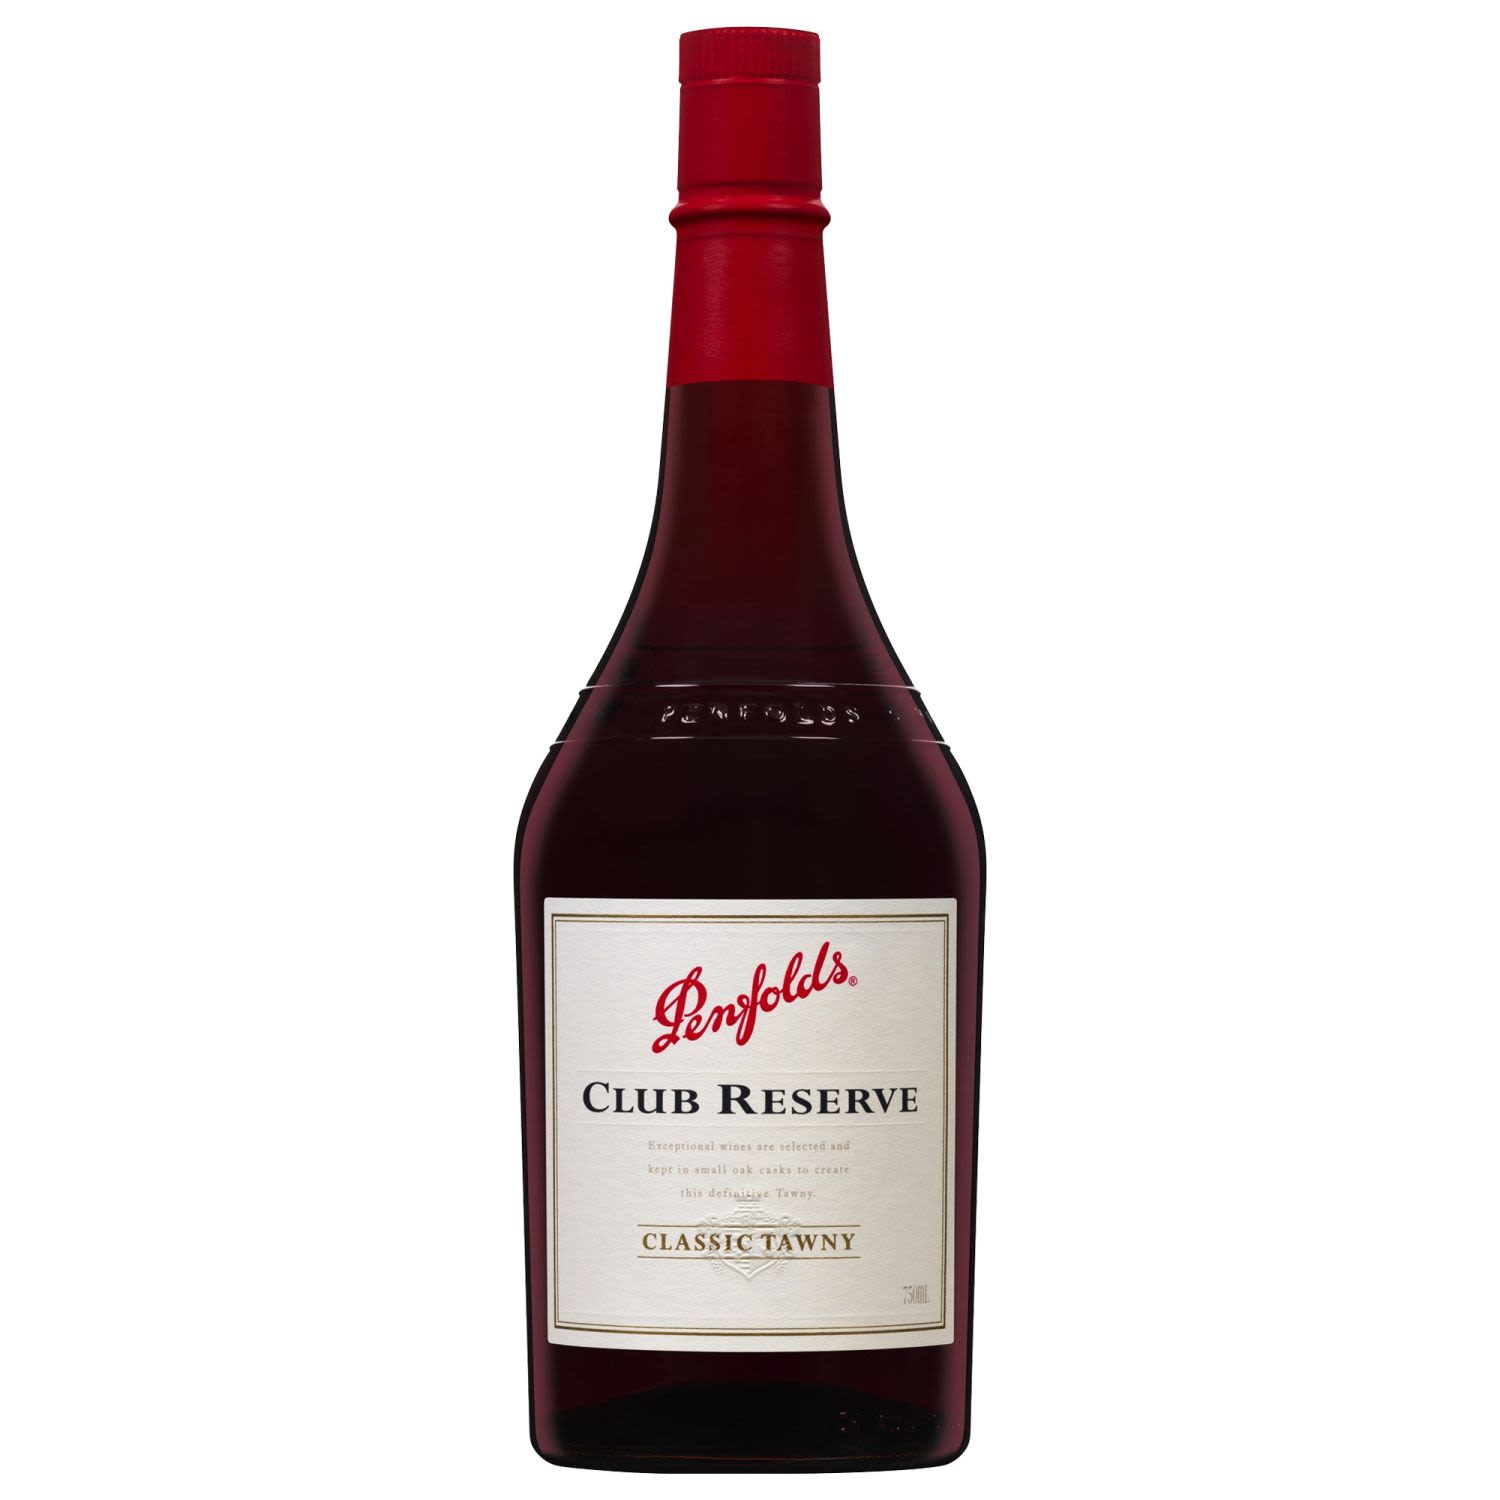 A classic South Australian Tawny Port by Penfolds that has an average age of 5 to 10 years before release. Rich flavours of dark berry with a balance caramel sweetness.<br /> <br />Alcohol Volume: 18.00%<br /><br />Pack Format: Bottle<br /><br />Standard Drinks: 10.7</br /><br />Pack Type: Bottle<br /><br />Country of Origin: Australia<br /><br />Region: South Australia<br /><br />Vintage: Non Vintage<br />